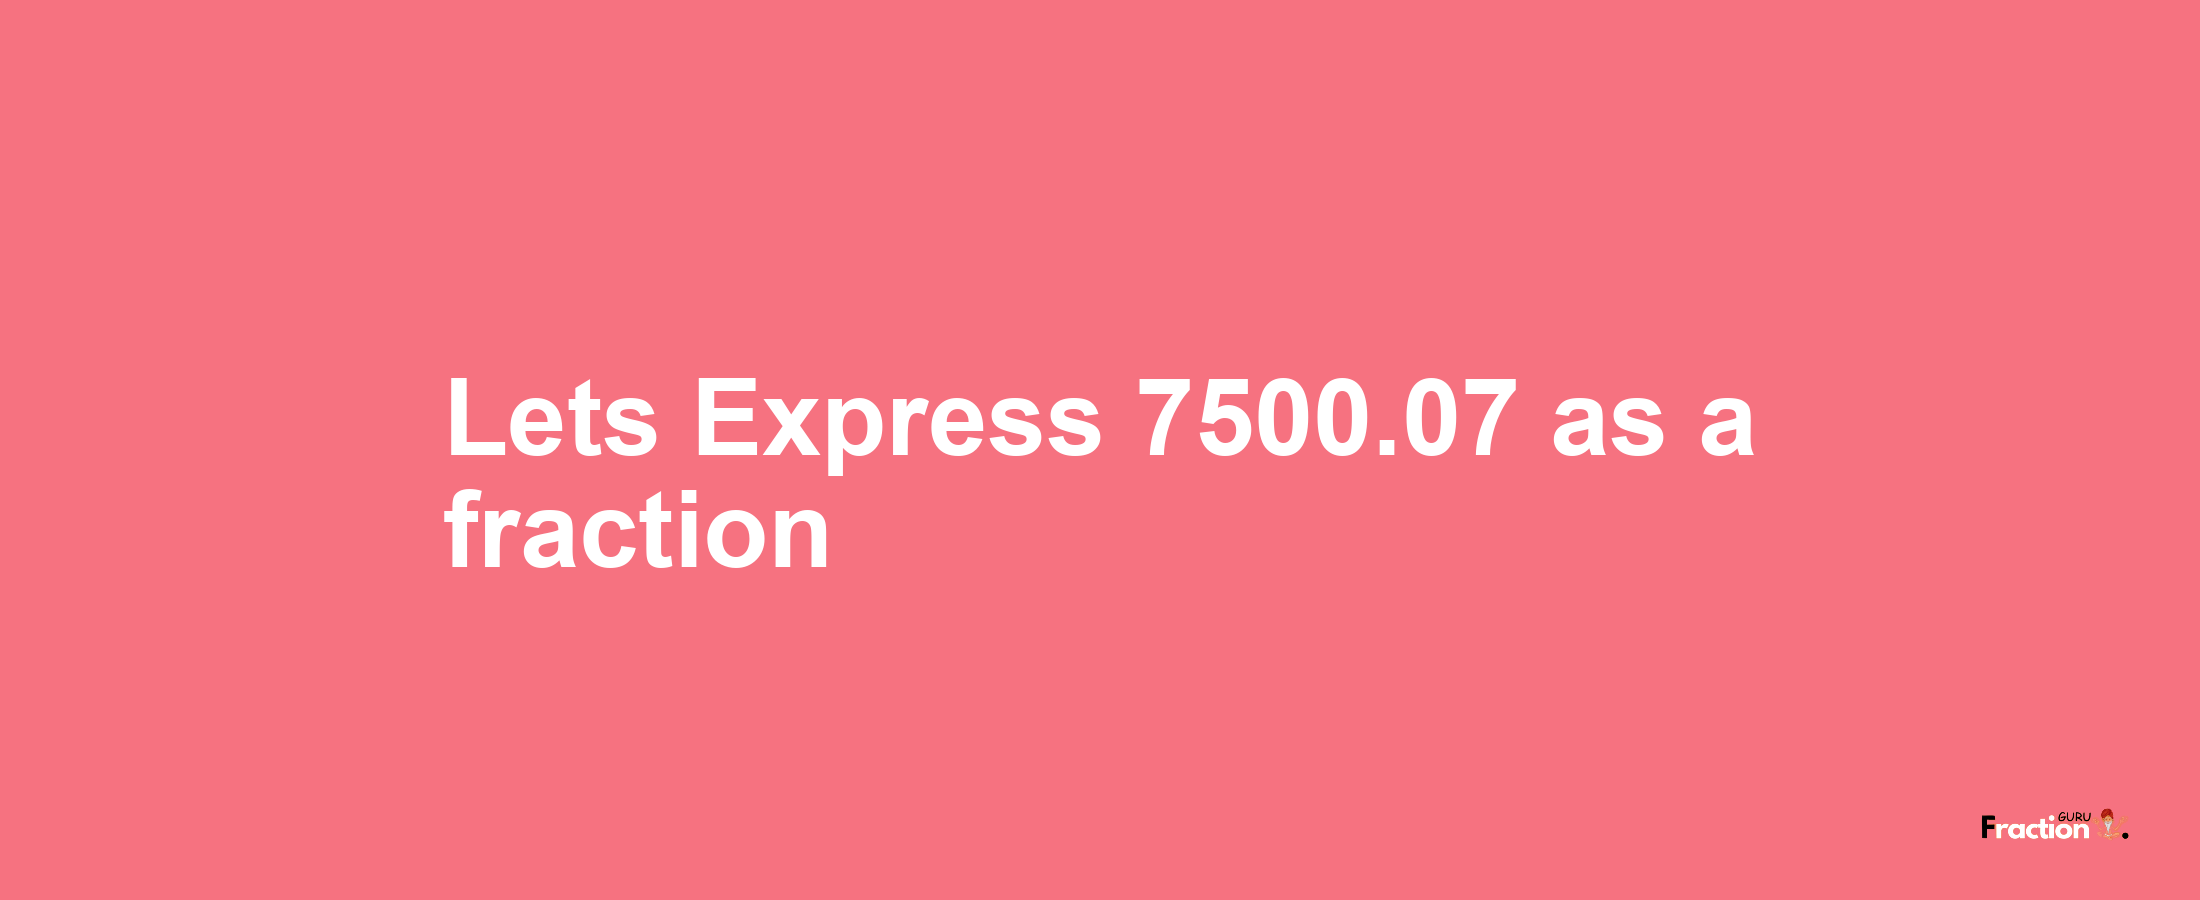 Lets Express 7500.07 as afraction